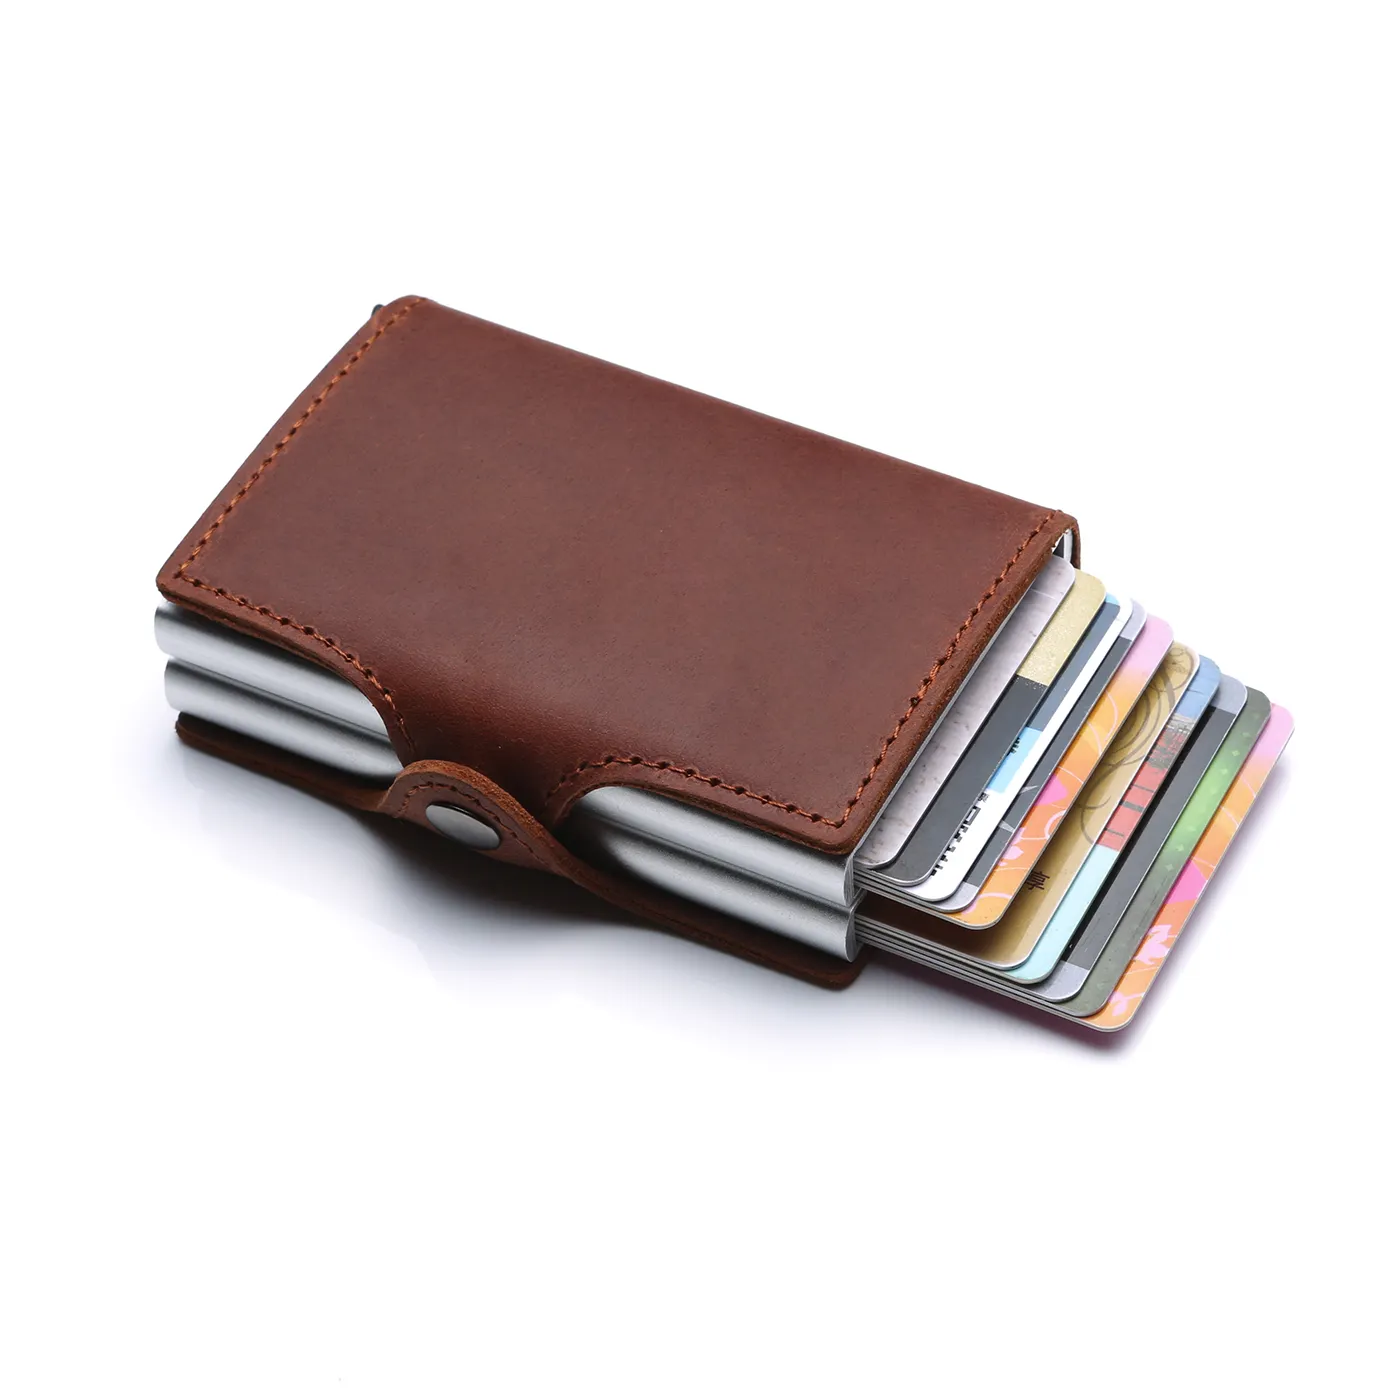 2020 Hot Sale RFID Blocking Men Genuine Leather Double Aluminum Case Credit Card Holder Wallet Best for Promotion Birthday Gift